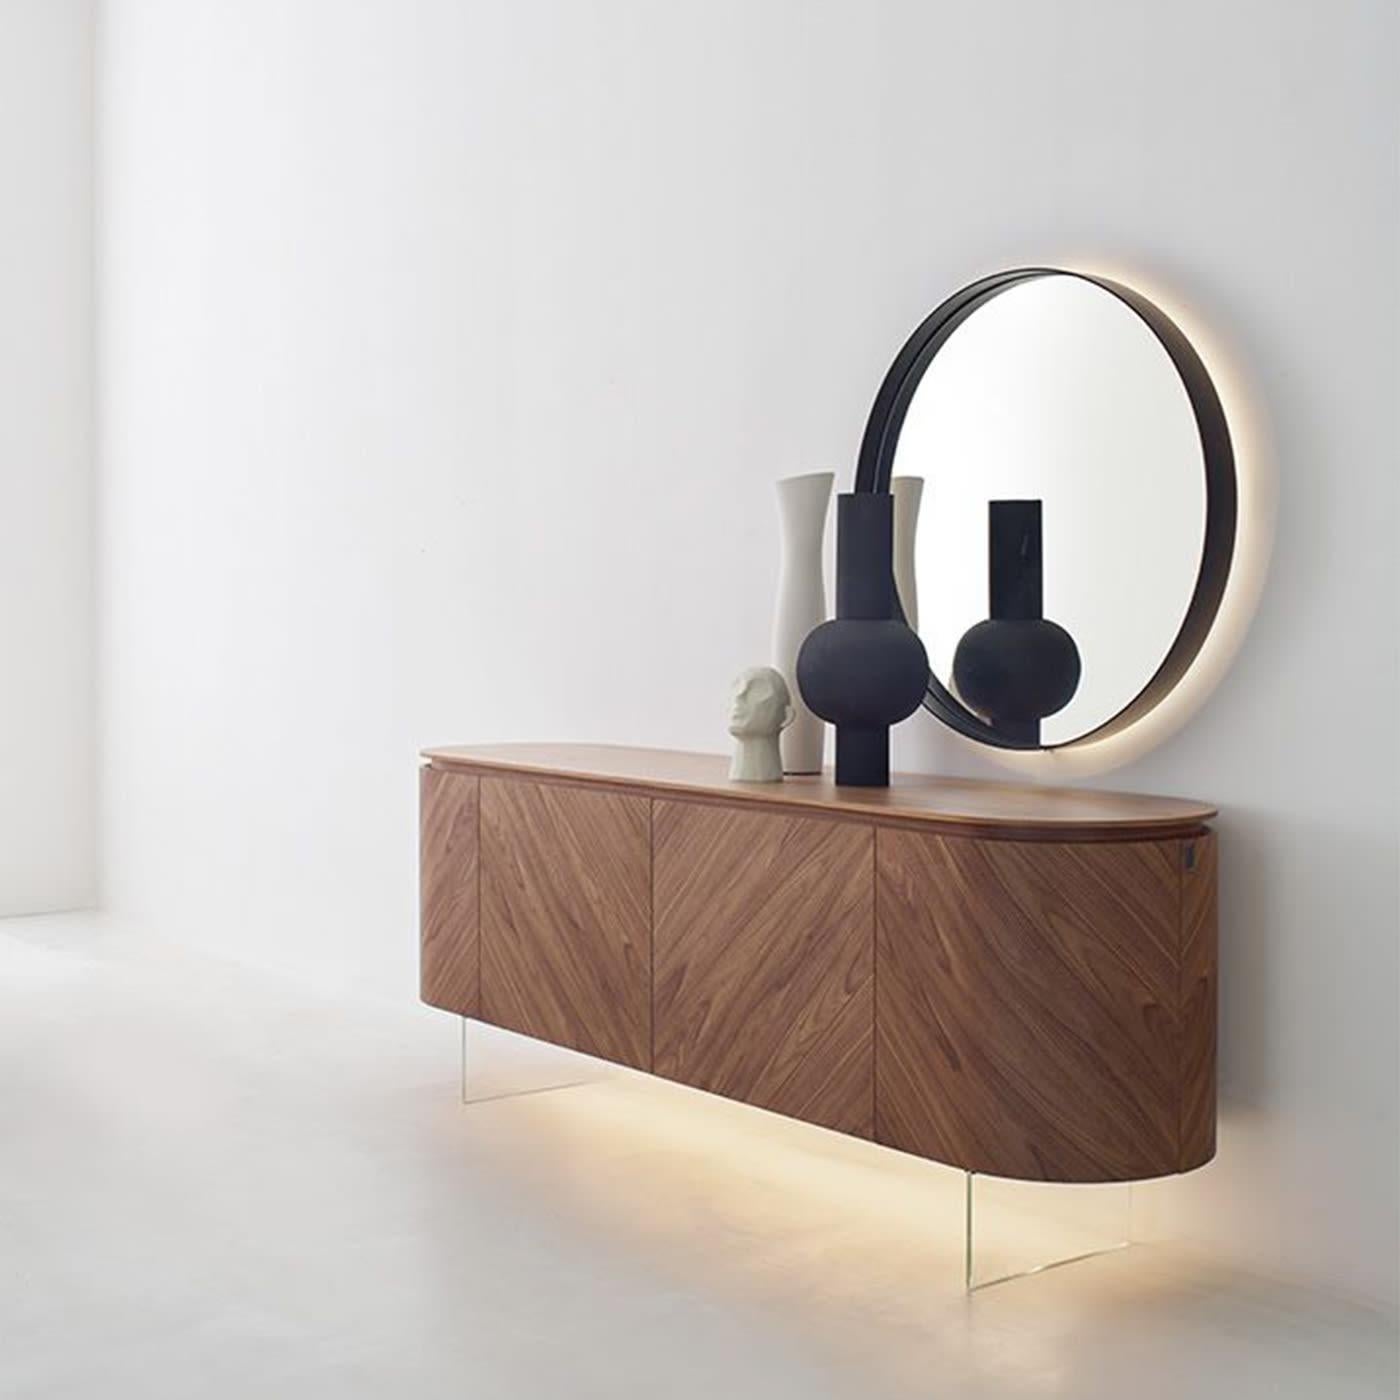 Subtle industrial flair imbues this sophisticated mirror, a superb example of minimalist design. Essential in its perfectly round shape celebrating the geometric perfection of the circle, it is diby a bold ring-shaped metal frame offered in an